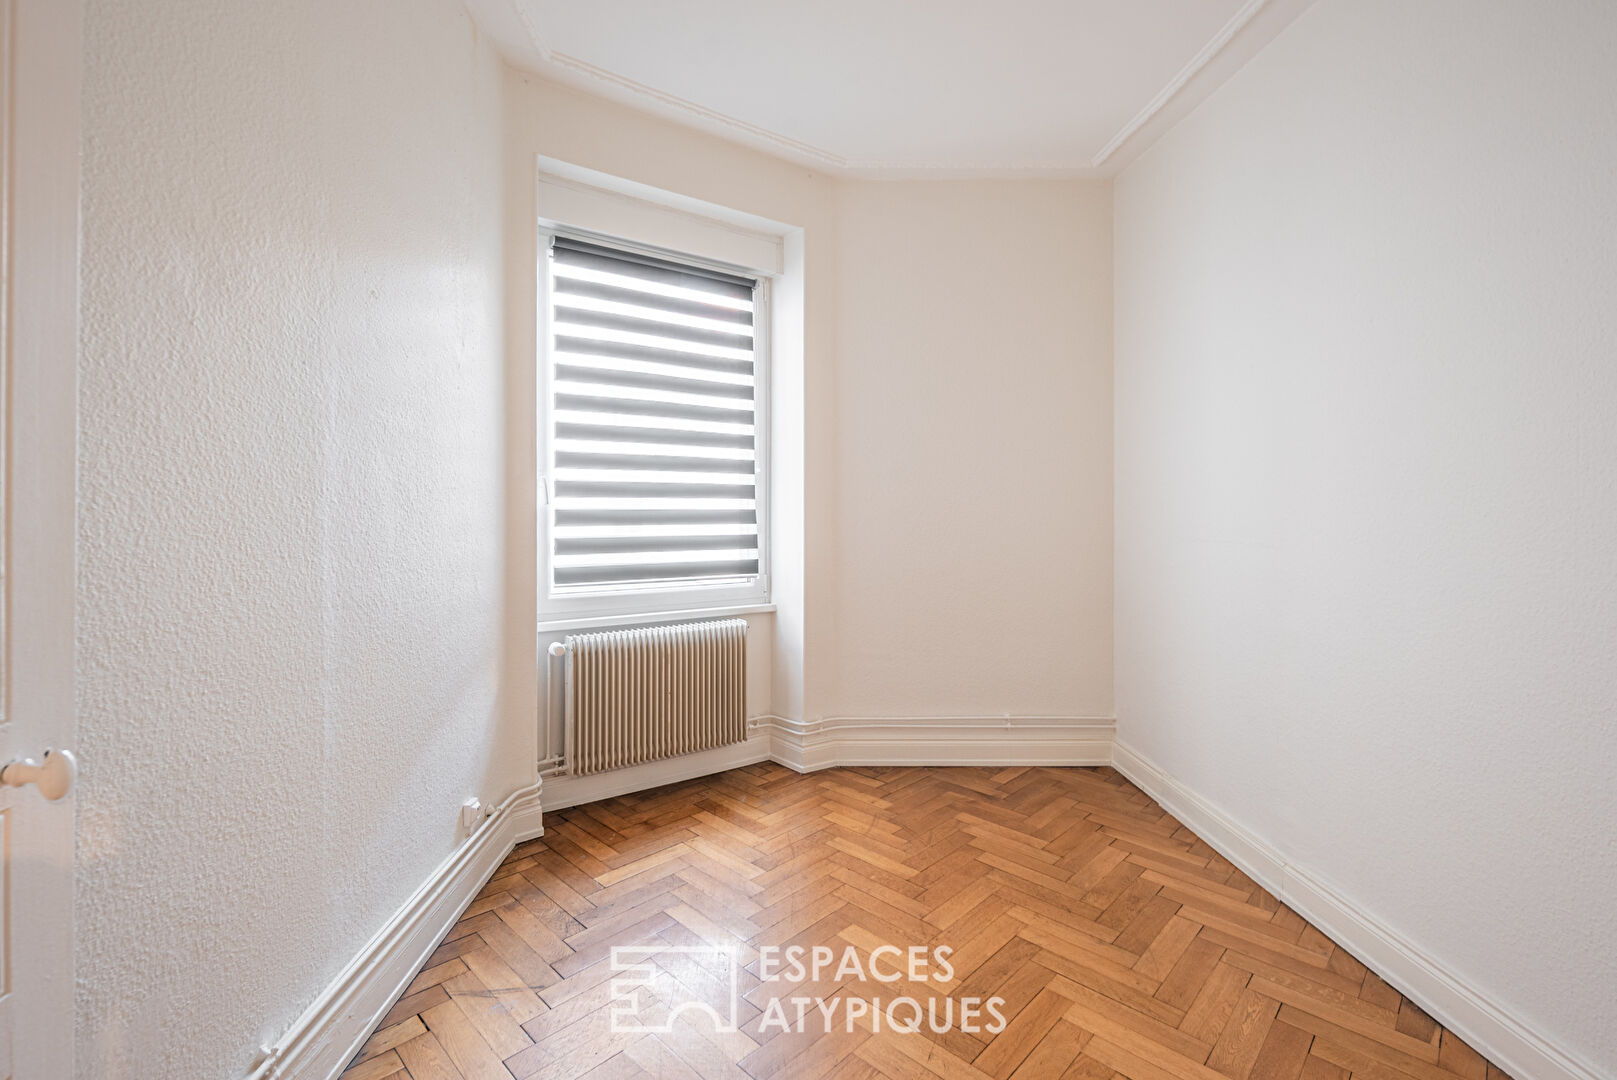 Already rented : Bourgeois flat